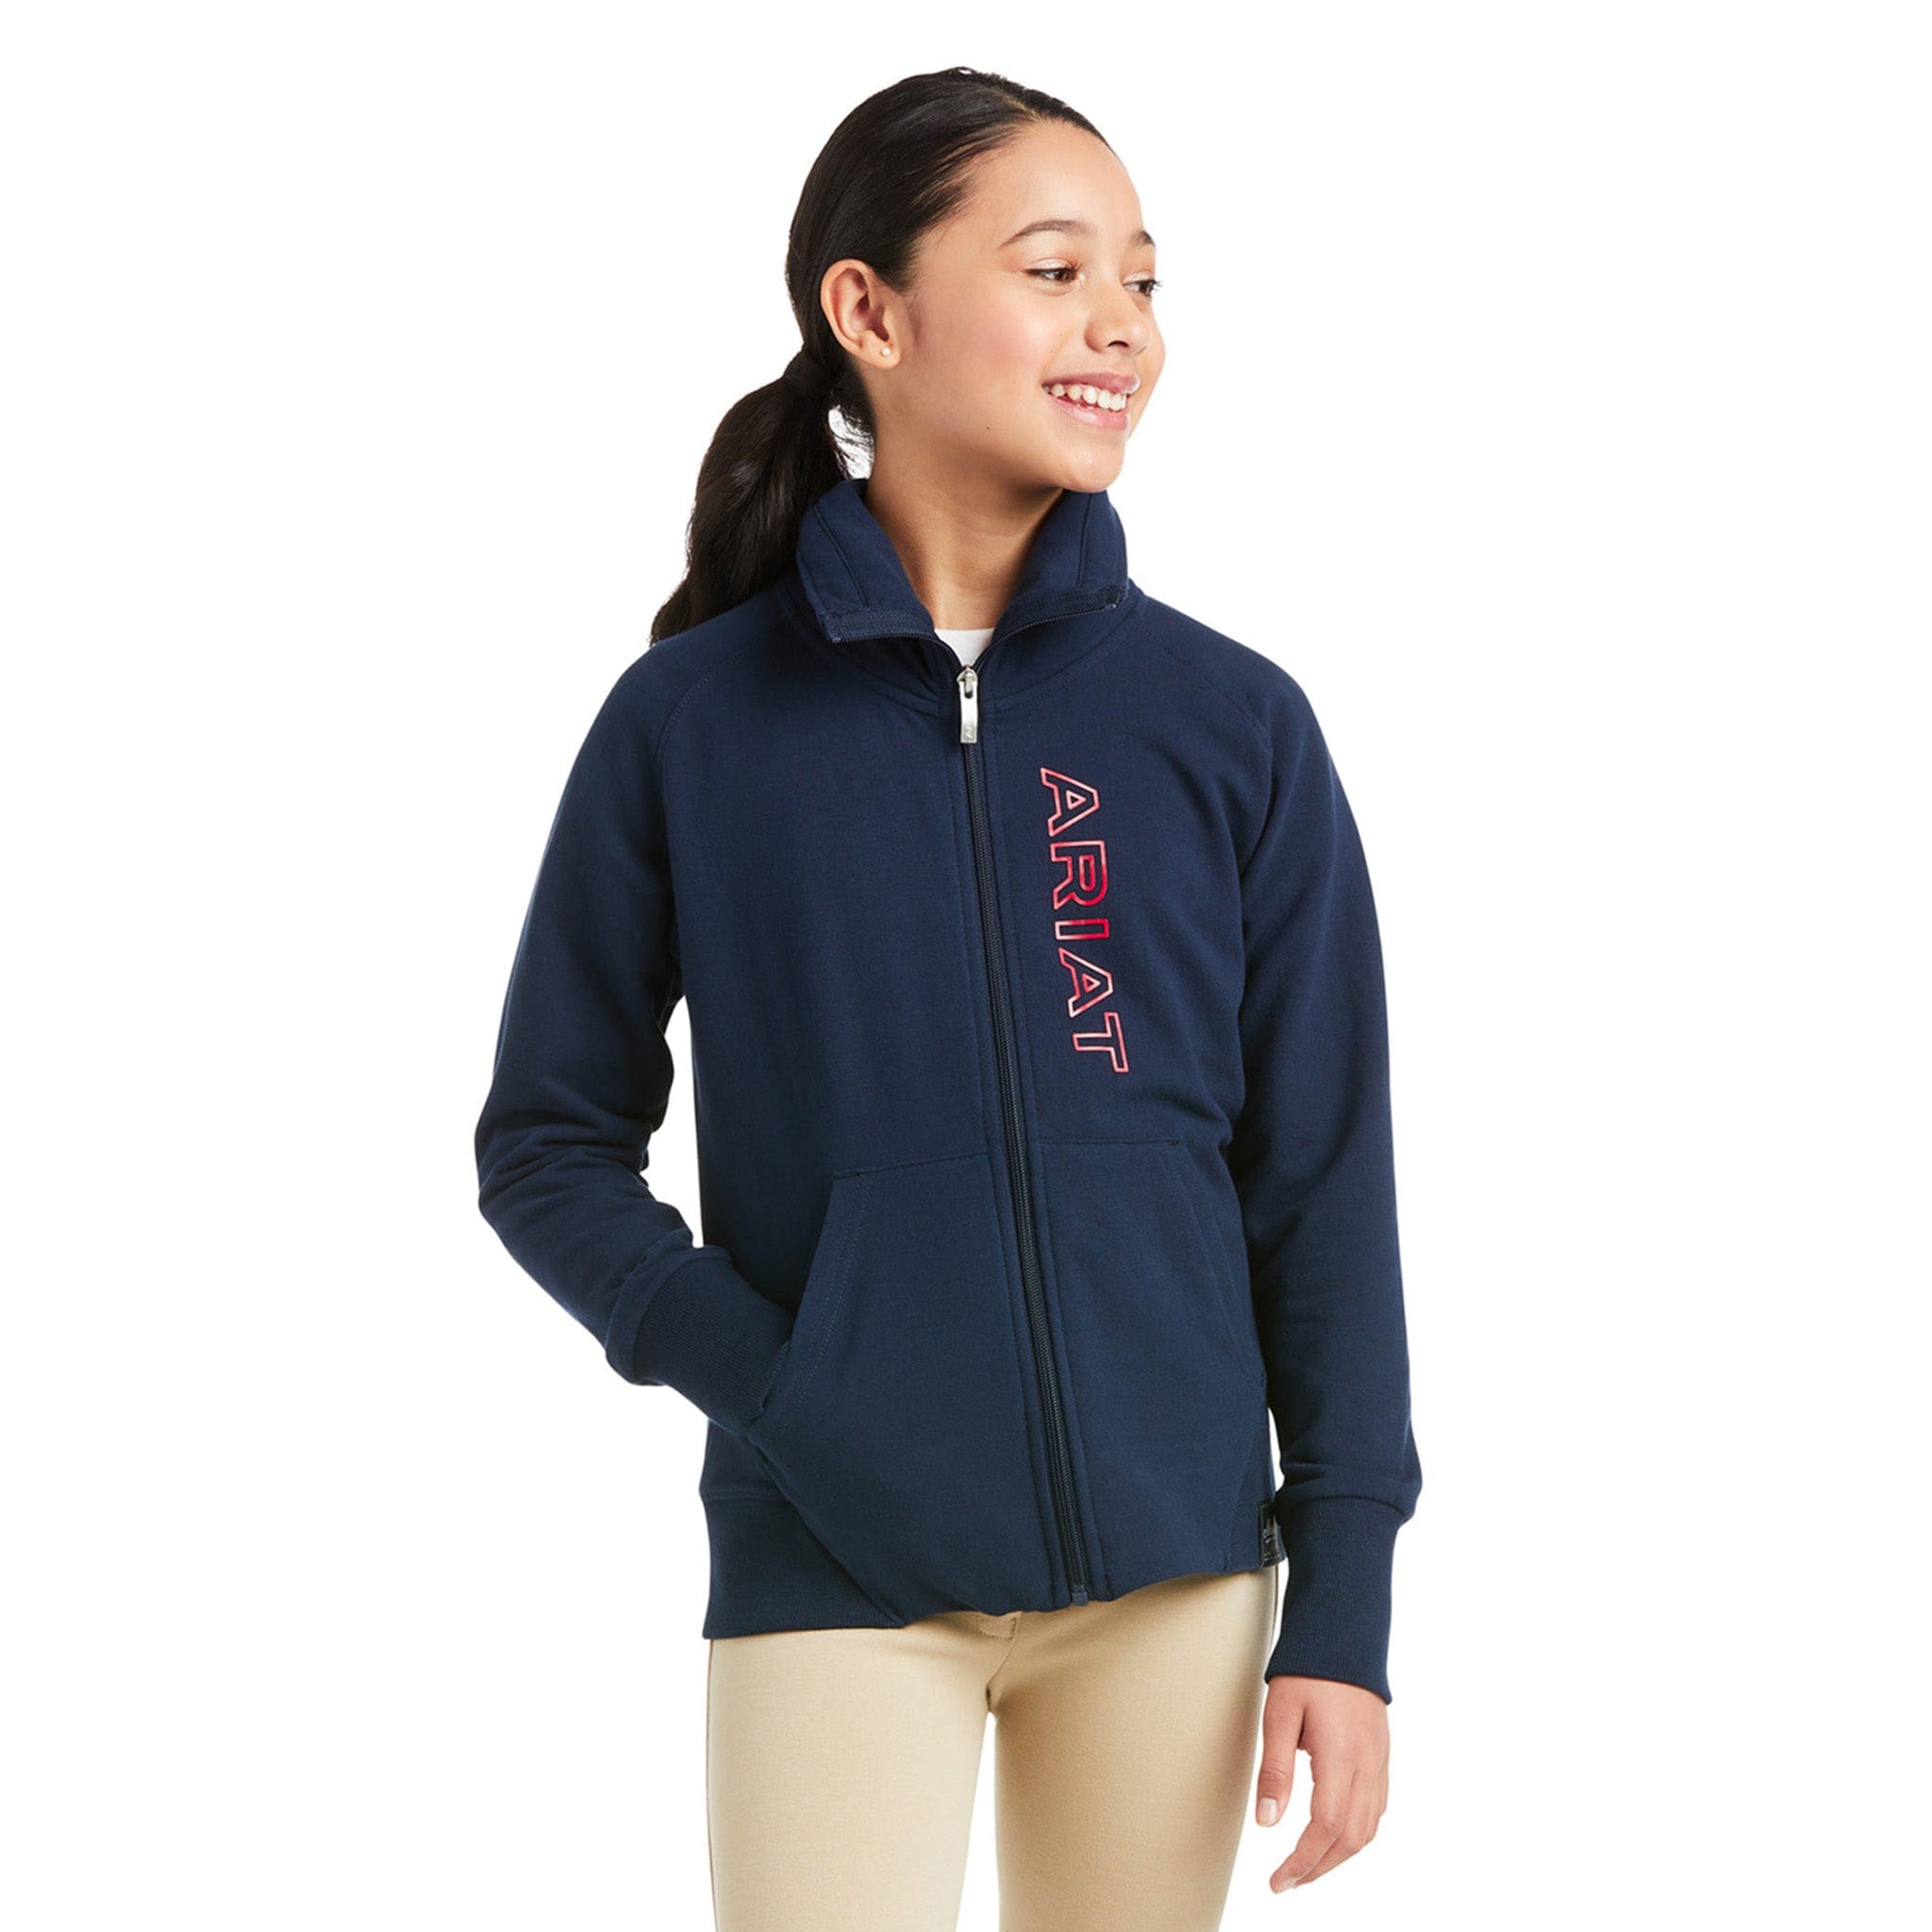 Ariat Youth Team Logo Full Zip Sweatshirt 10037723 Navy and Red Front